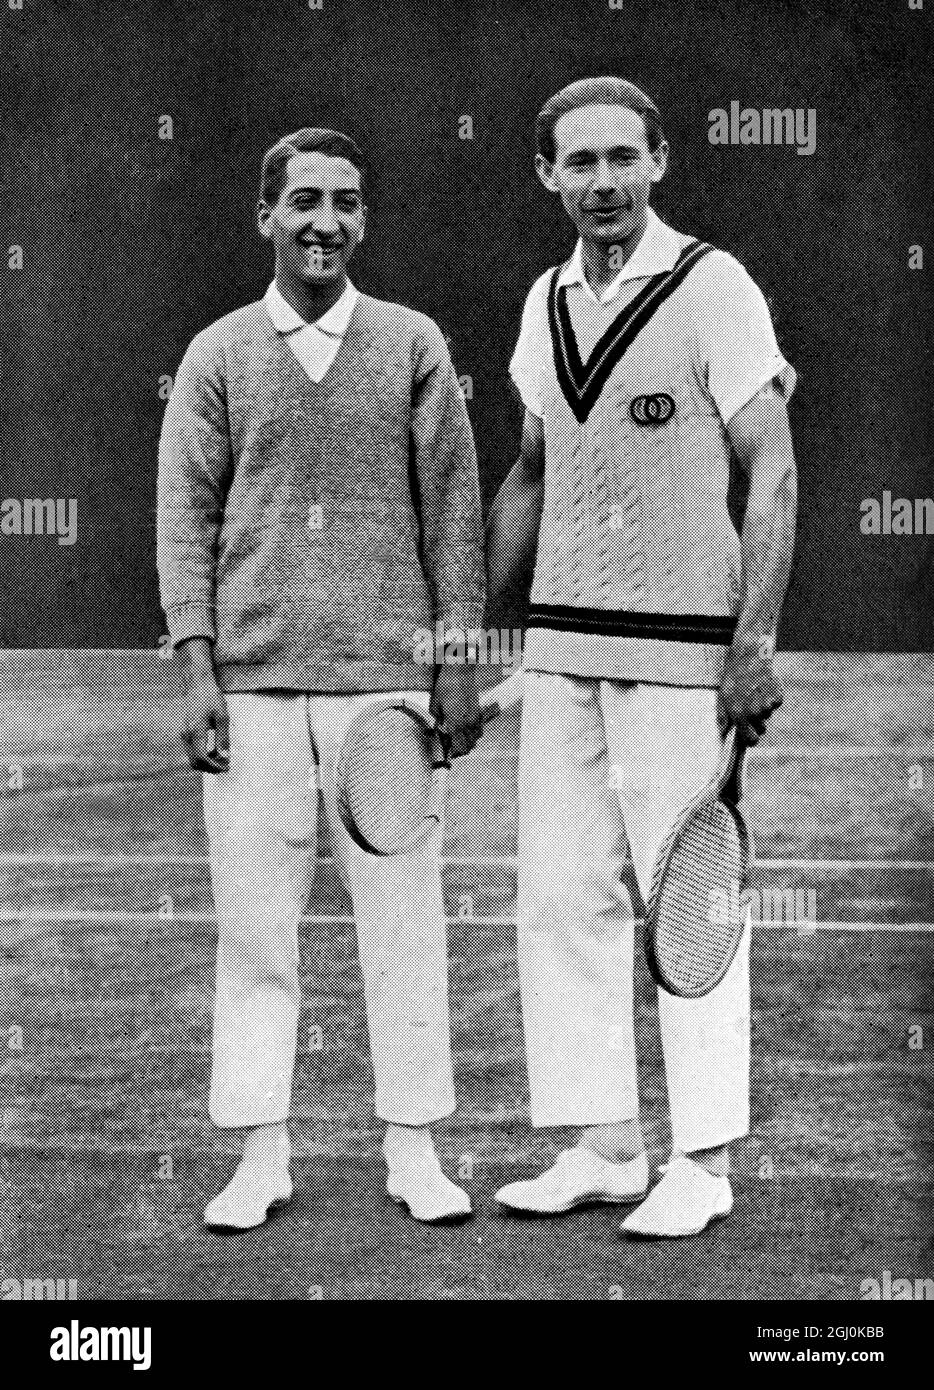 R. Lacoste and J. Borotra 1924 - all-French finalists. Jean René Lacoste (July 2, 1904 - October 12, 1996) was a famous French tennis player and businessman, nicknamed ''the Crocodile'' or ''the Alligator'' by fans, because of his pugnacity on court; he is now mostly known as being the namesake of the Lacoste tennis shirt, which he introduced in 1929. Lacoste was one of The Four Musketeers, France's tennis stars who dominated the game in the 1920s and early 1930s. Jean Robert Borotra (August 13, 1898 - June 17, 1994) was a French champion tennis player, one of the famous ''Four Musketeers'' fr Stock Photo